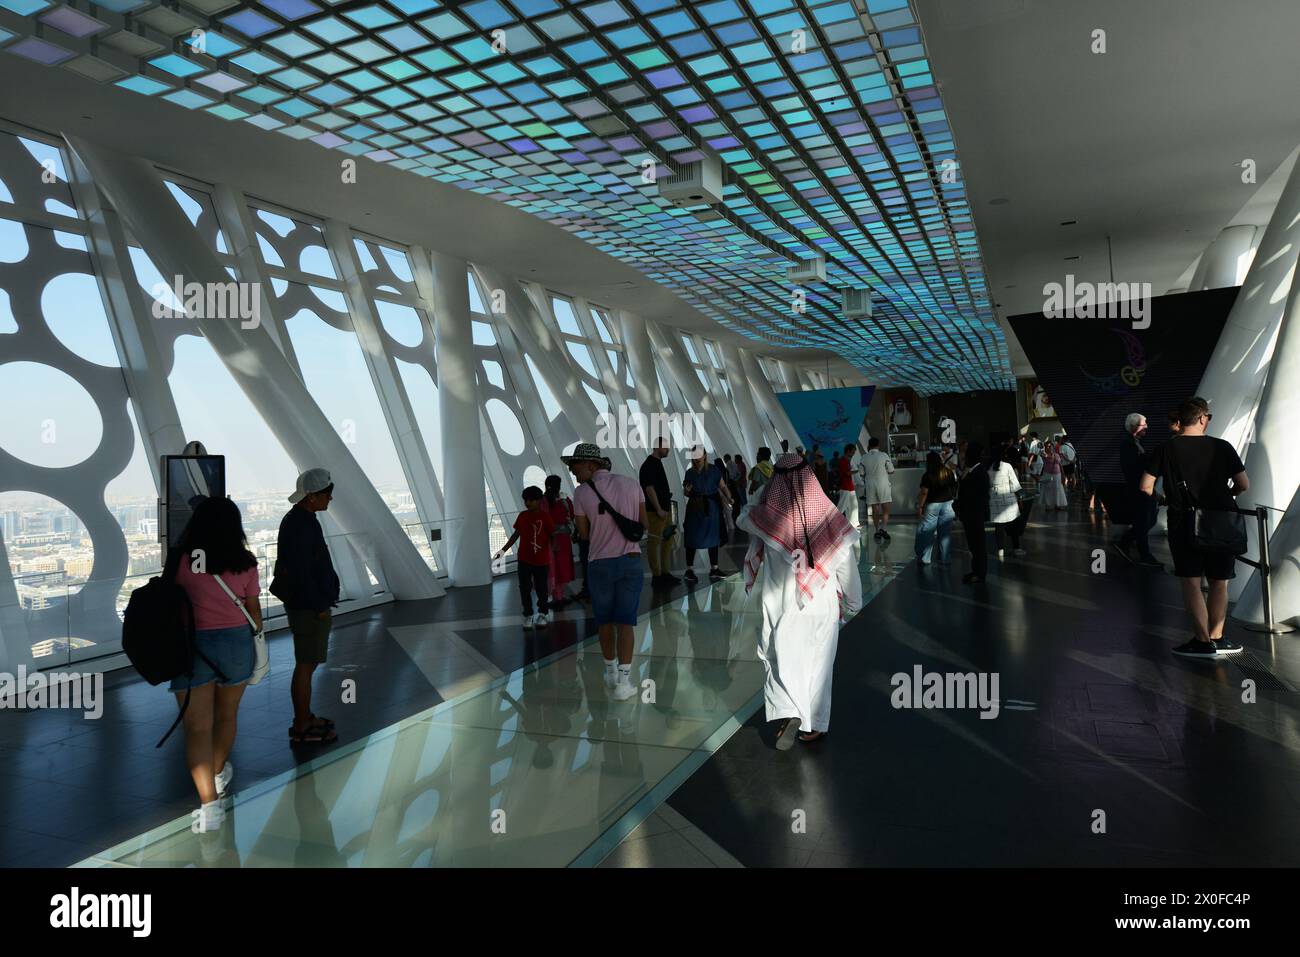 The Observatory deck at the top of the Dubai Frame in Dubai, UAE. Stock Photo